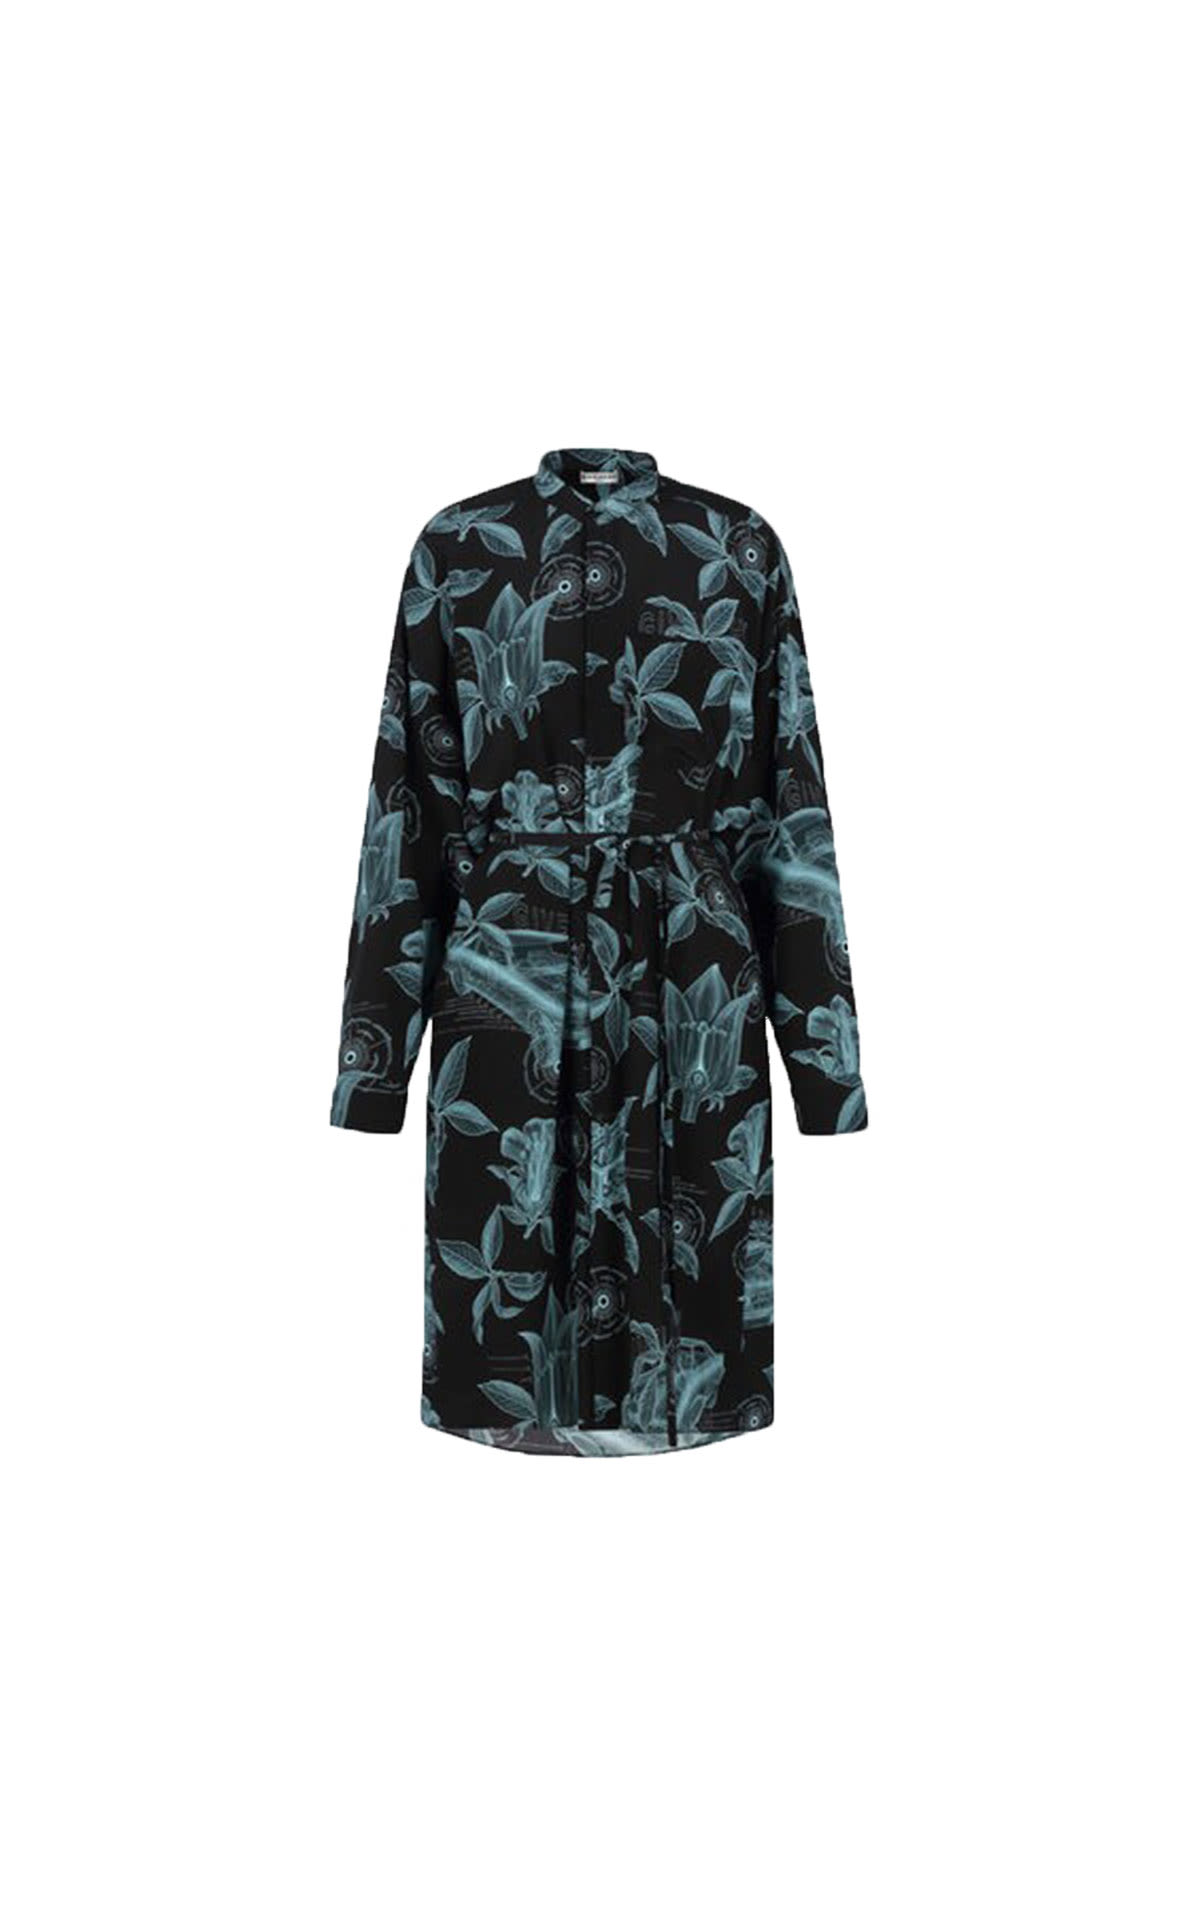 Givenchy Shirt dress from Bicester Village